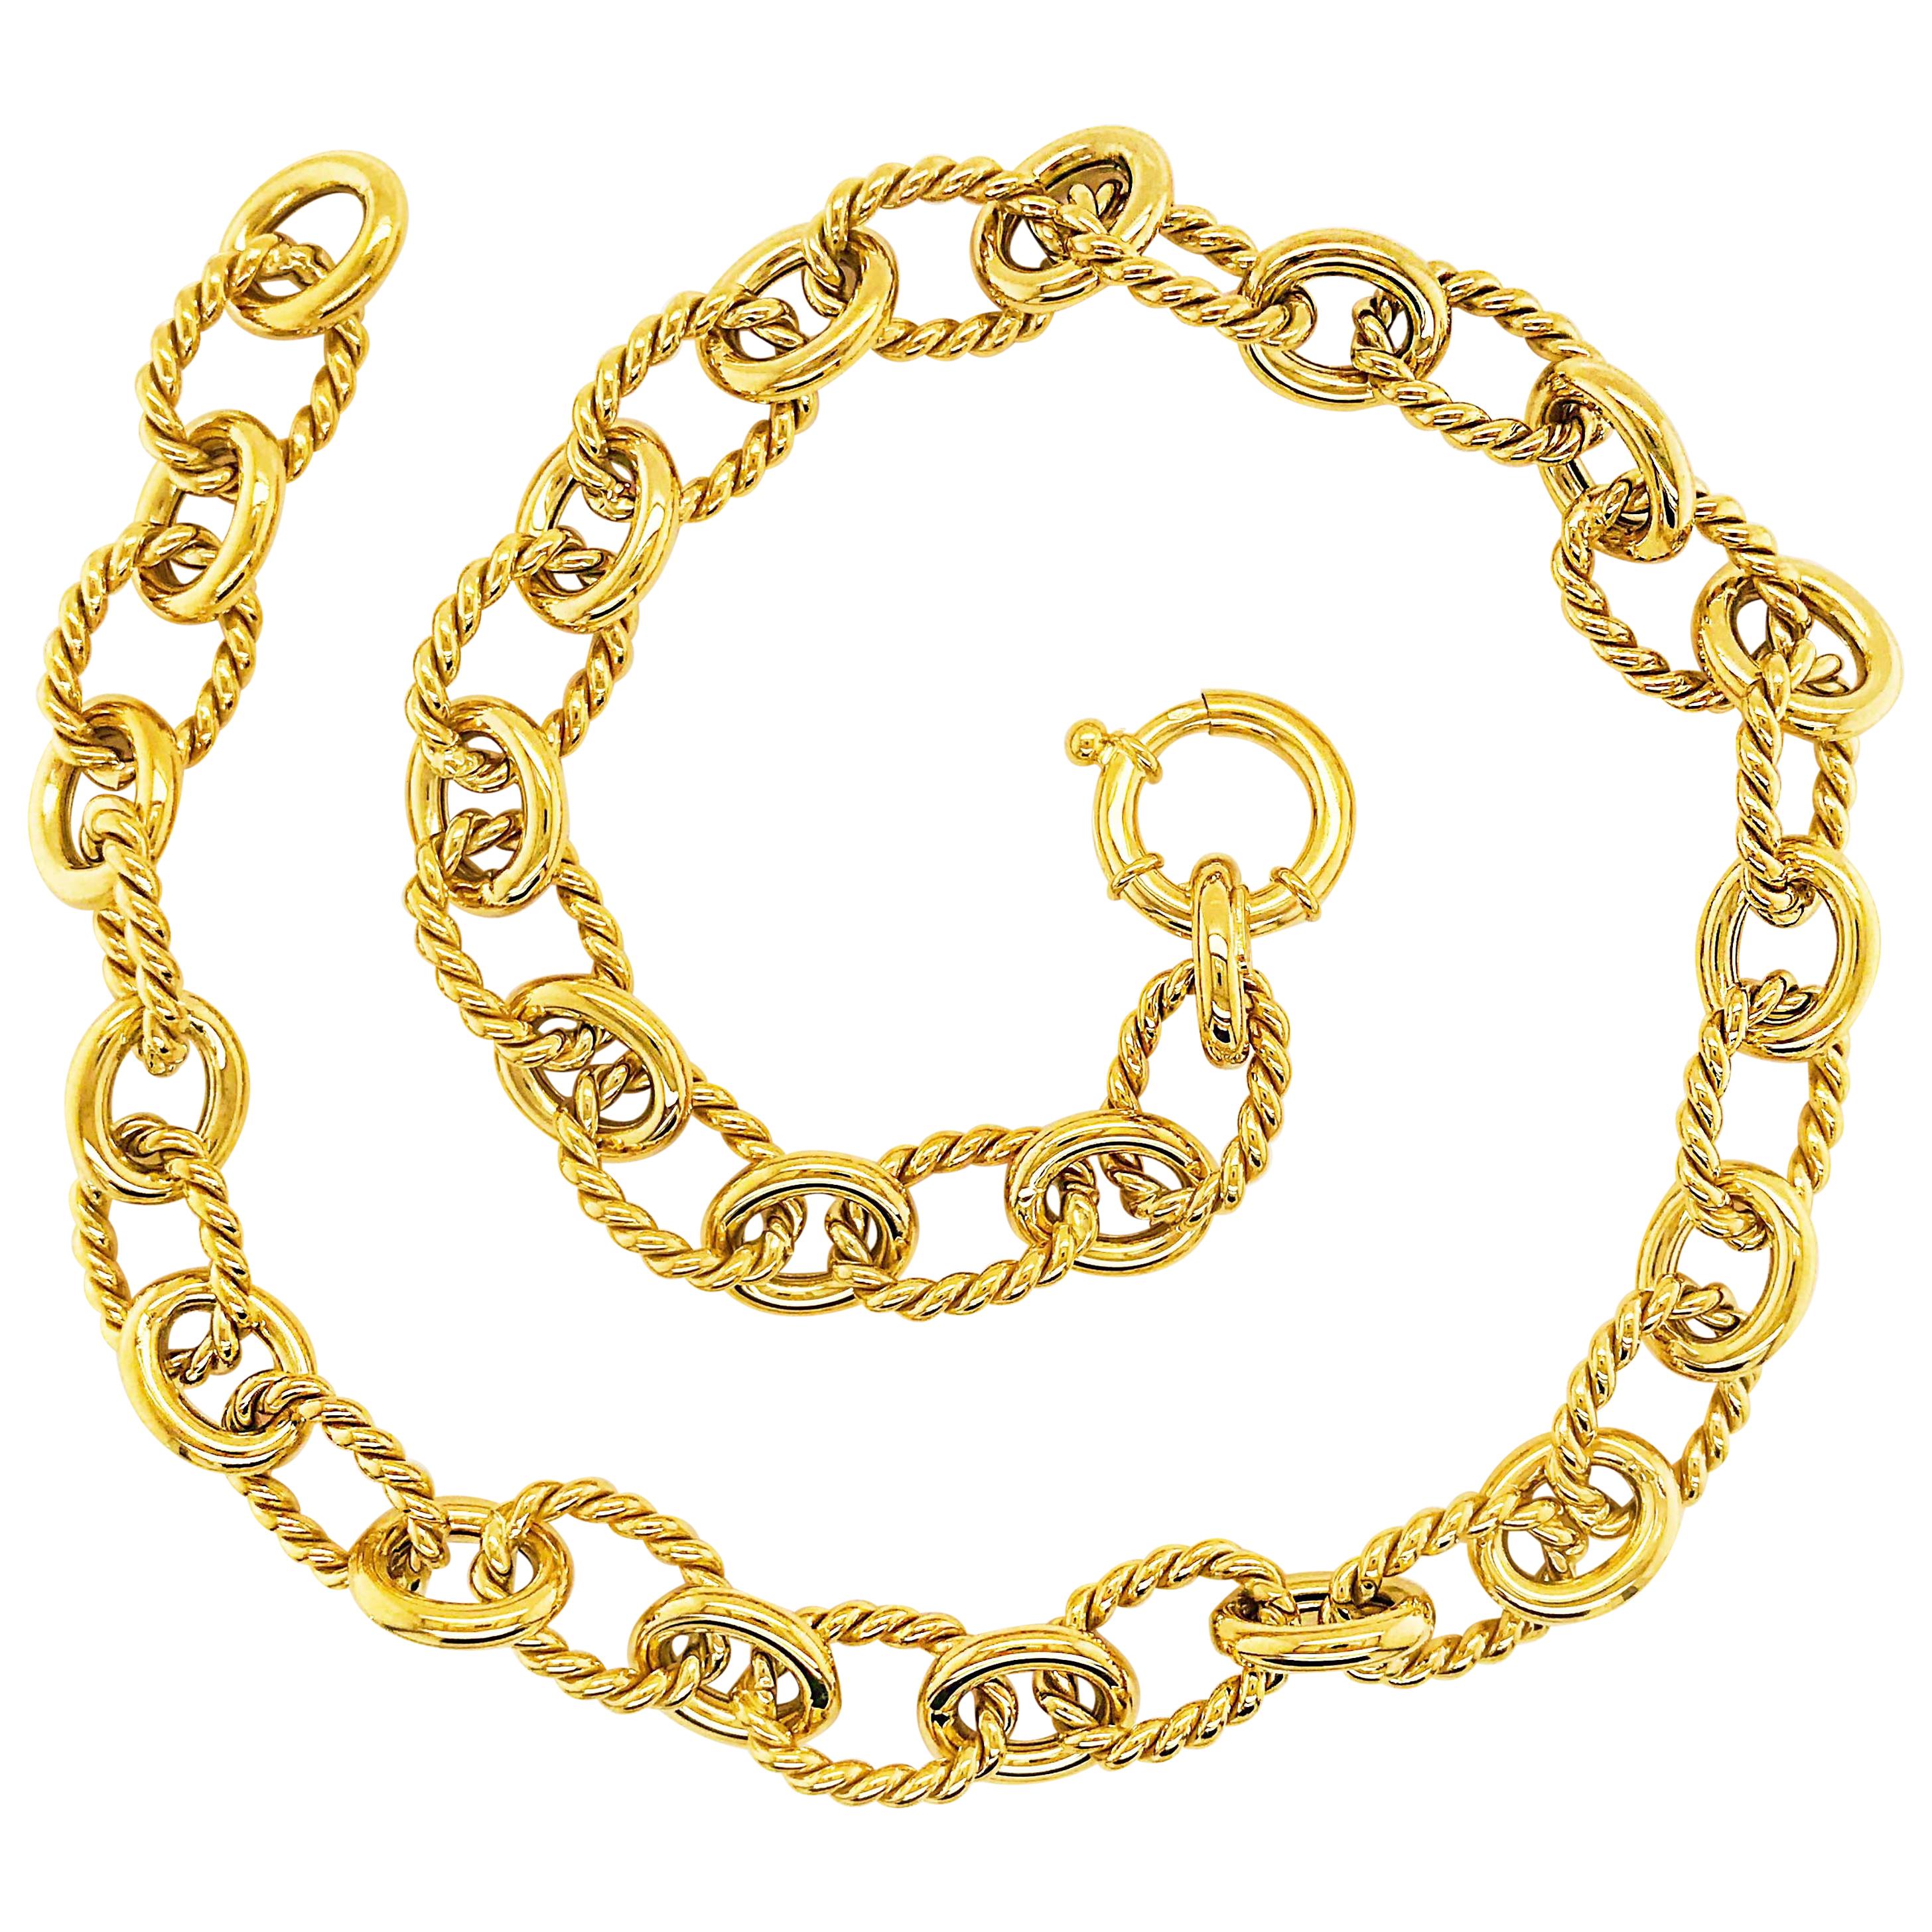 Large Link Chain Necklace 14 Karat Gold and Polished Oval Links-Chain For Sale